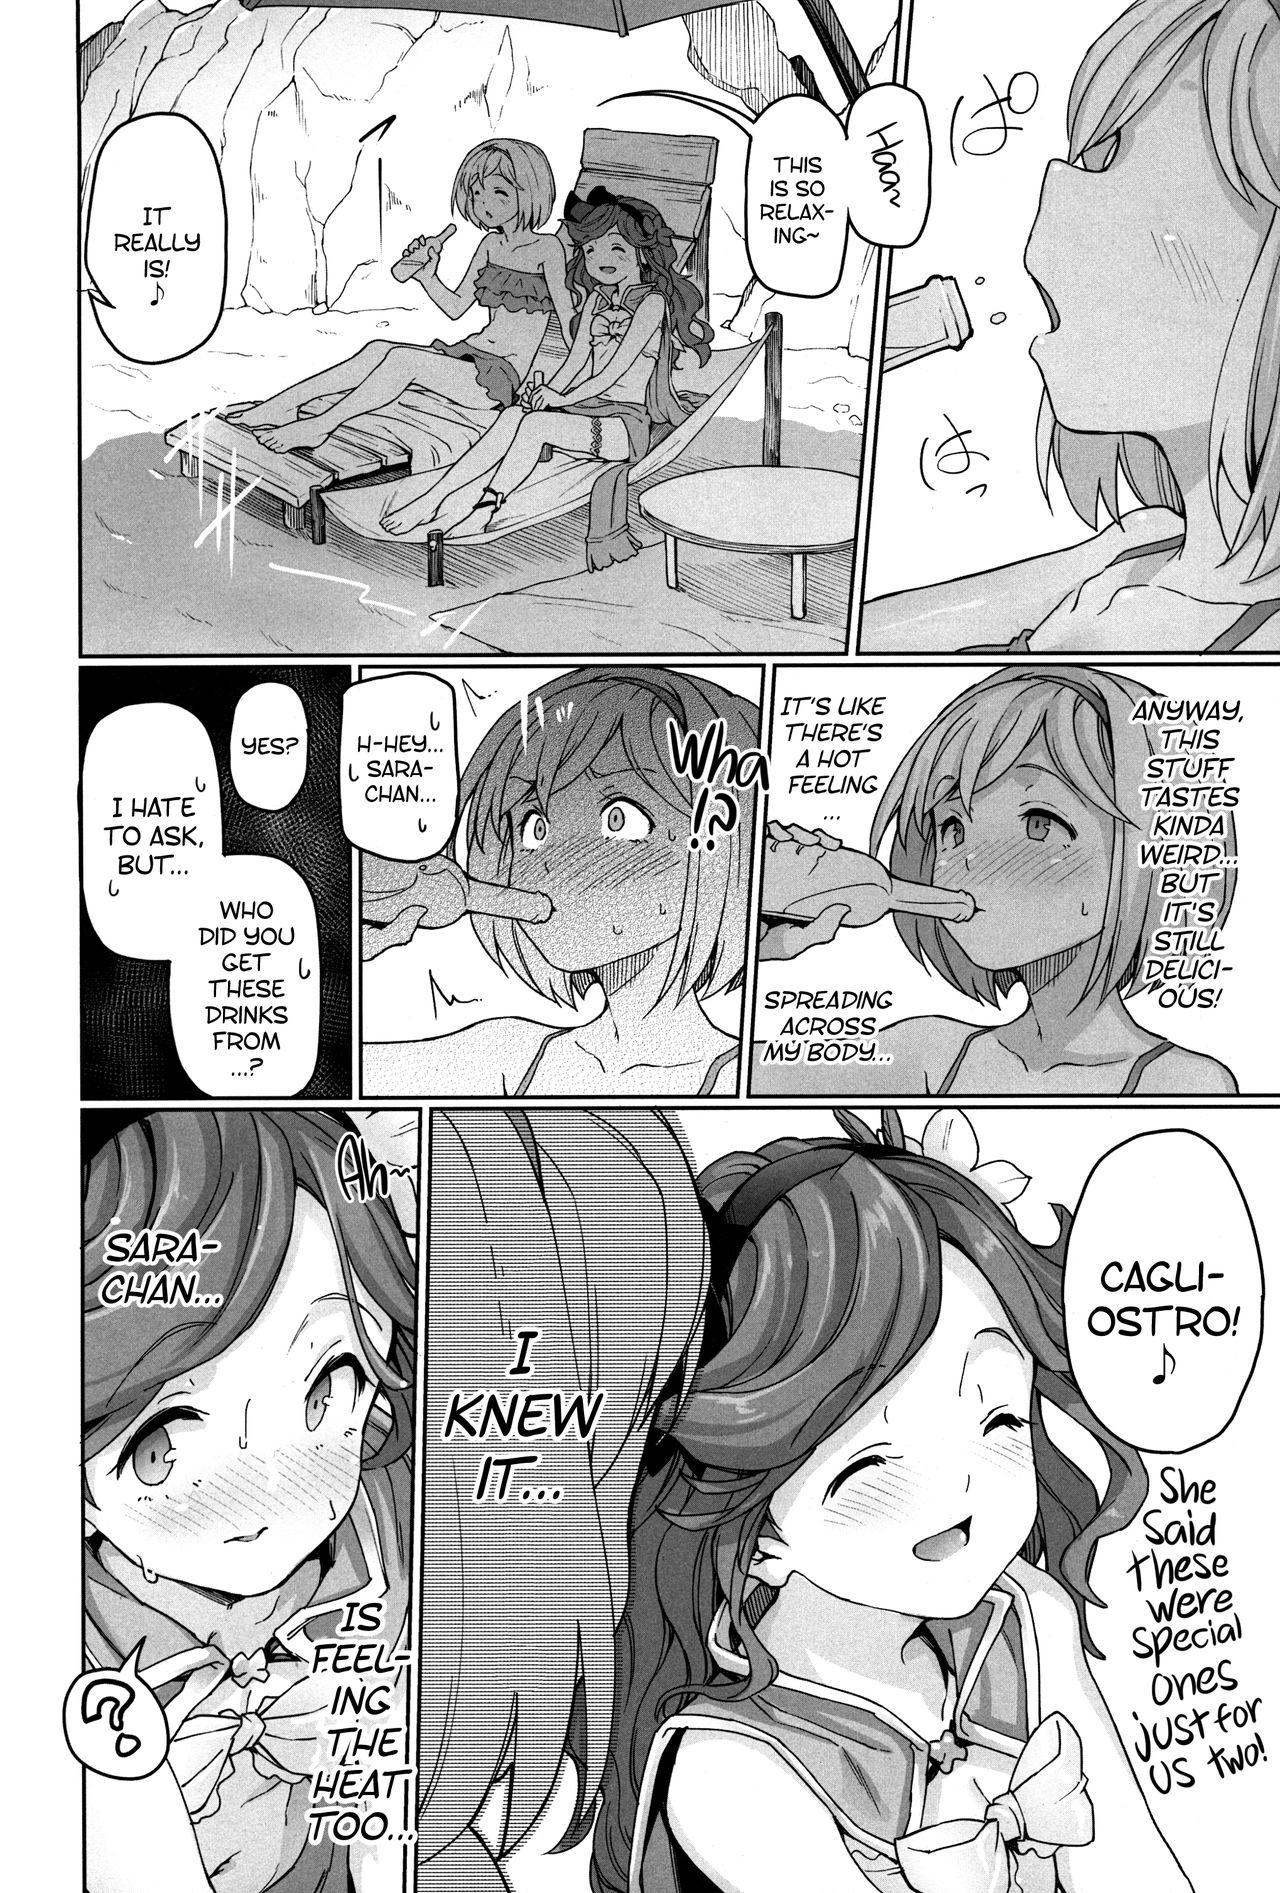 Cogida Sunagami no Komachi Angel? | A Town Beauty Angel of the Dunes? - Granblue fantasy Anal Sex - Page 5